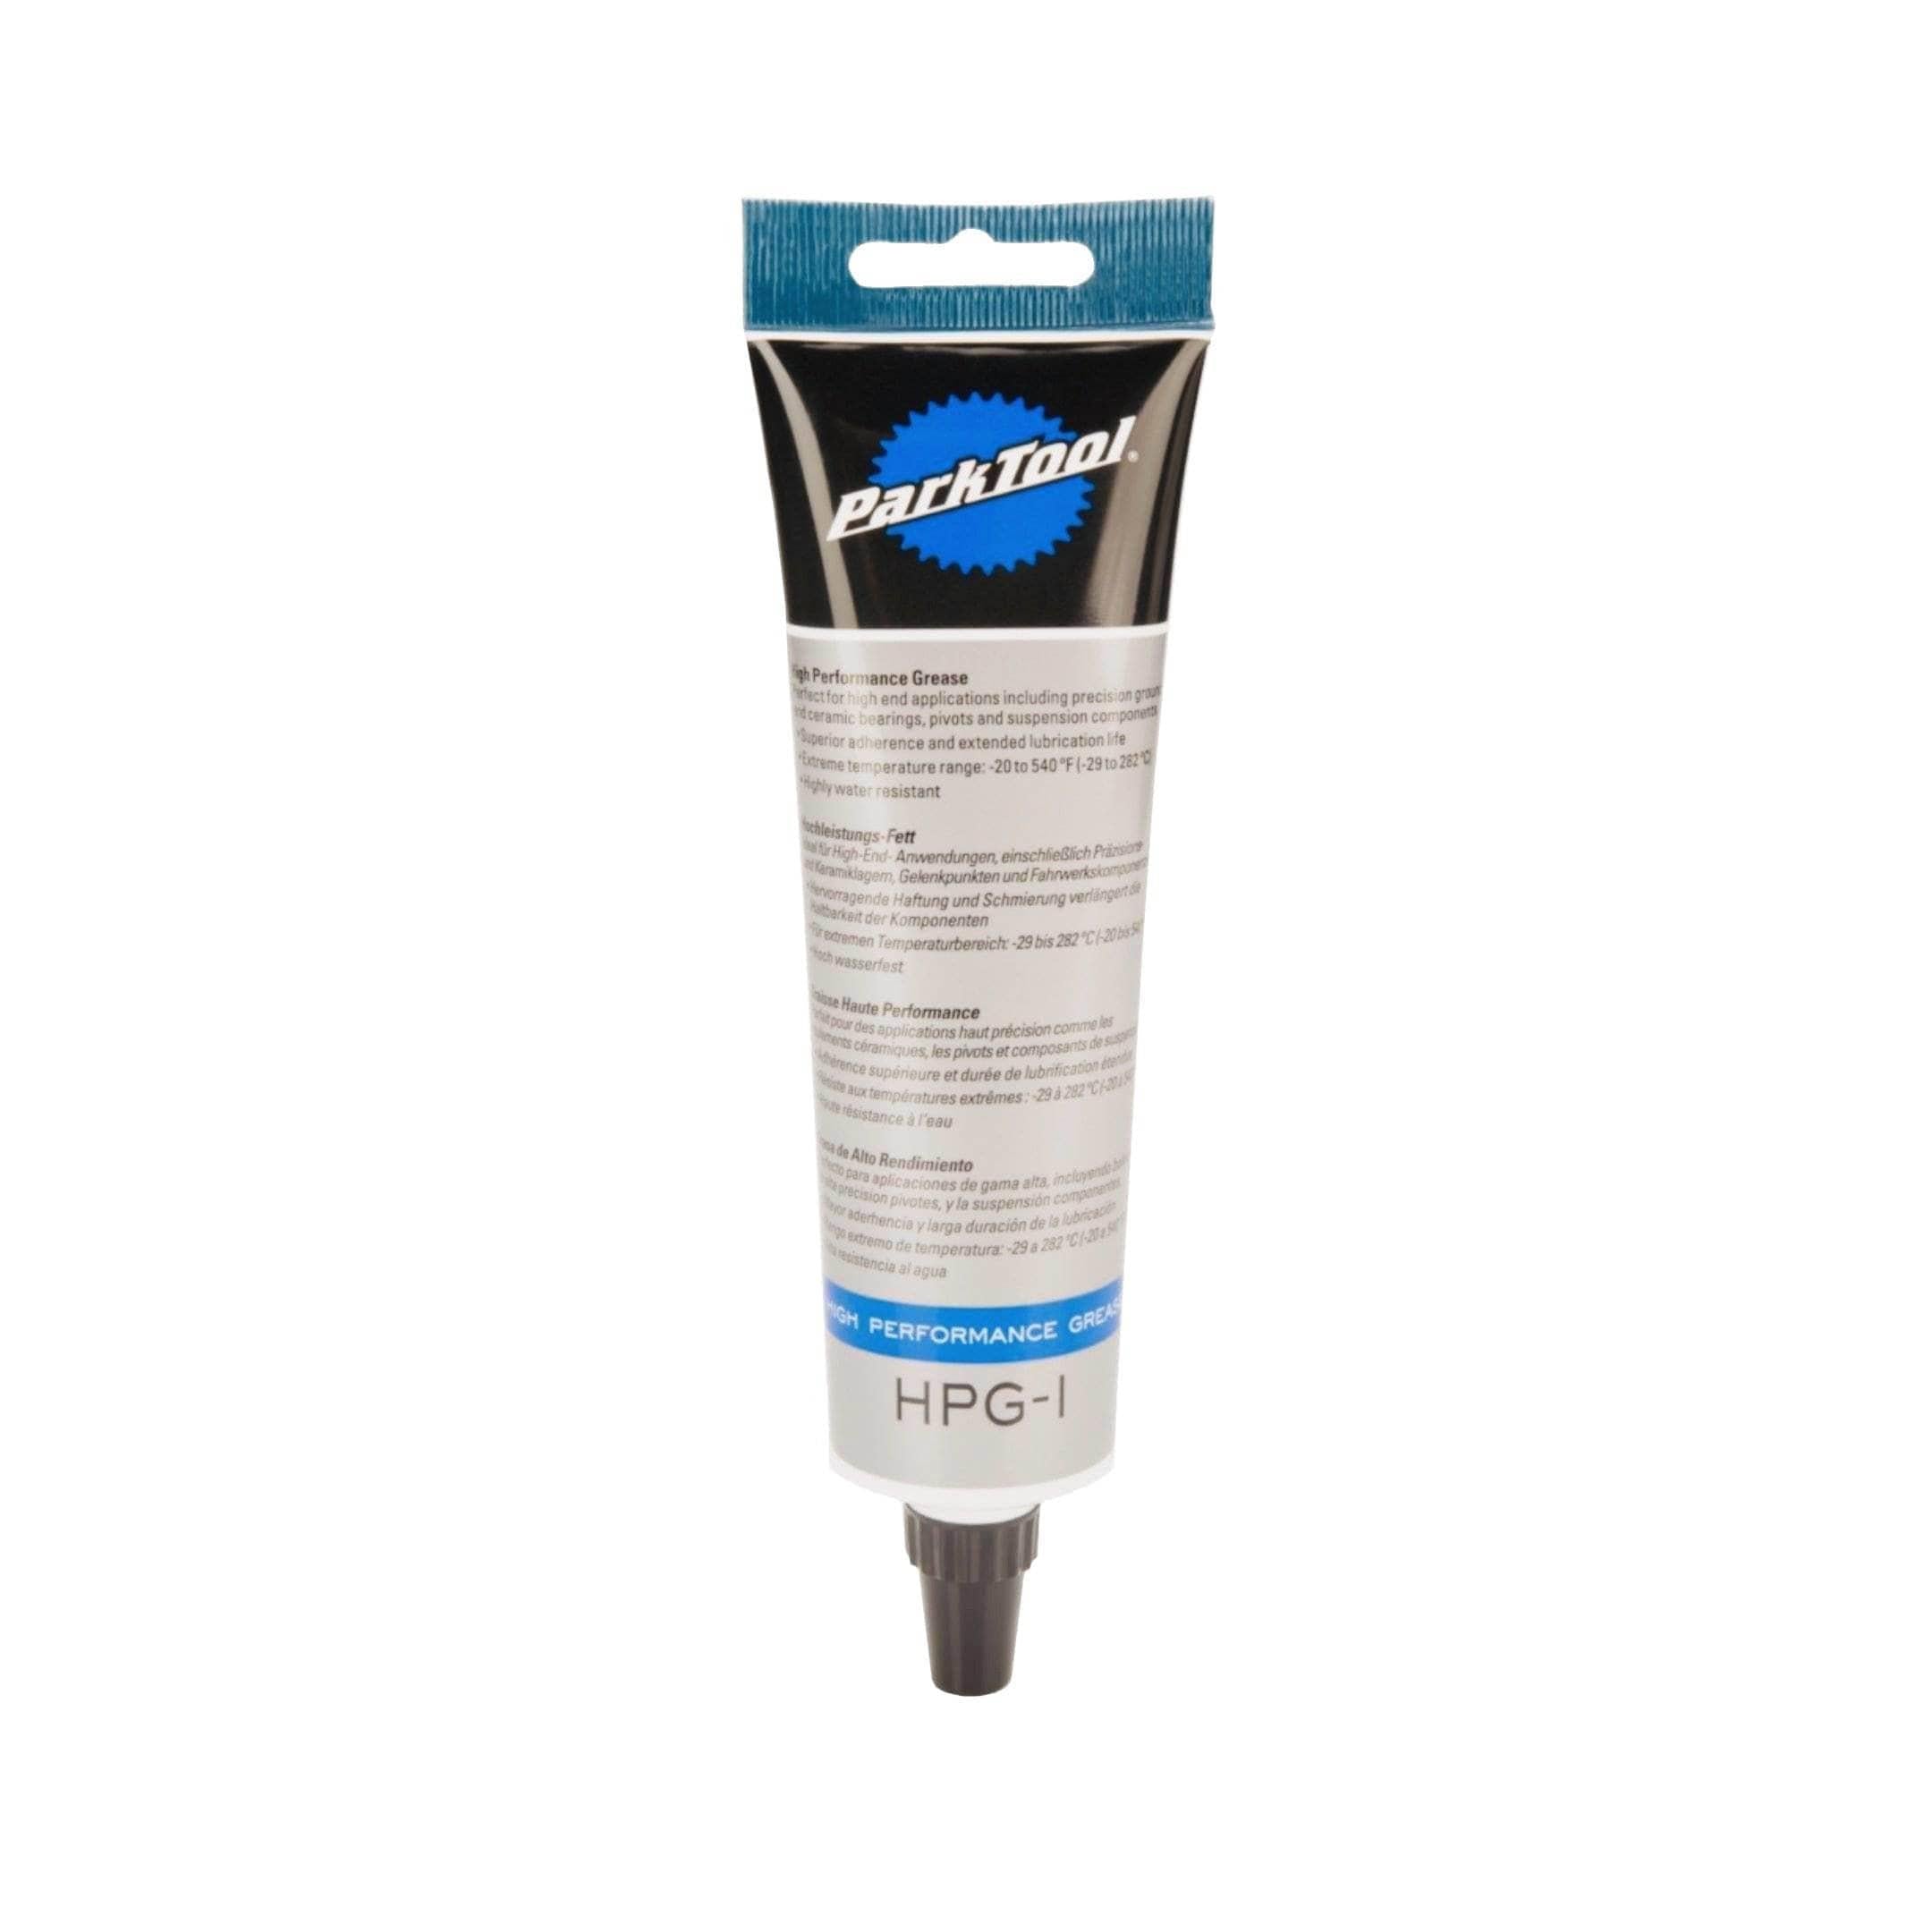 Park Tool Park Tool HPG-1 High Performance Grease 4 oz. Tube